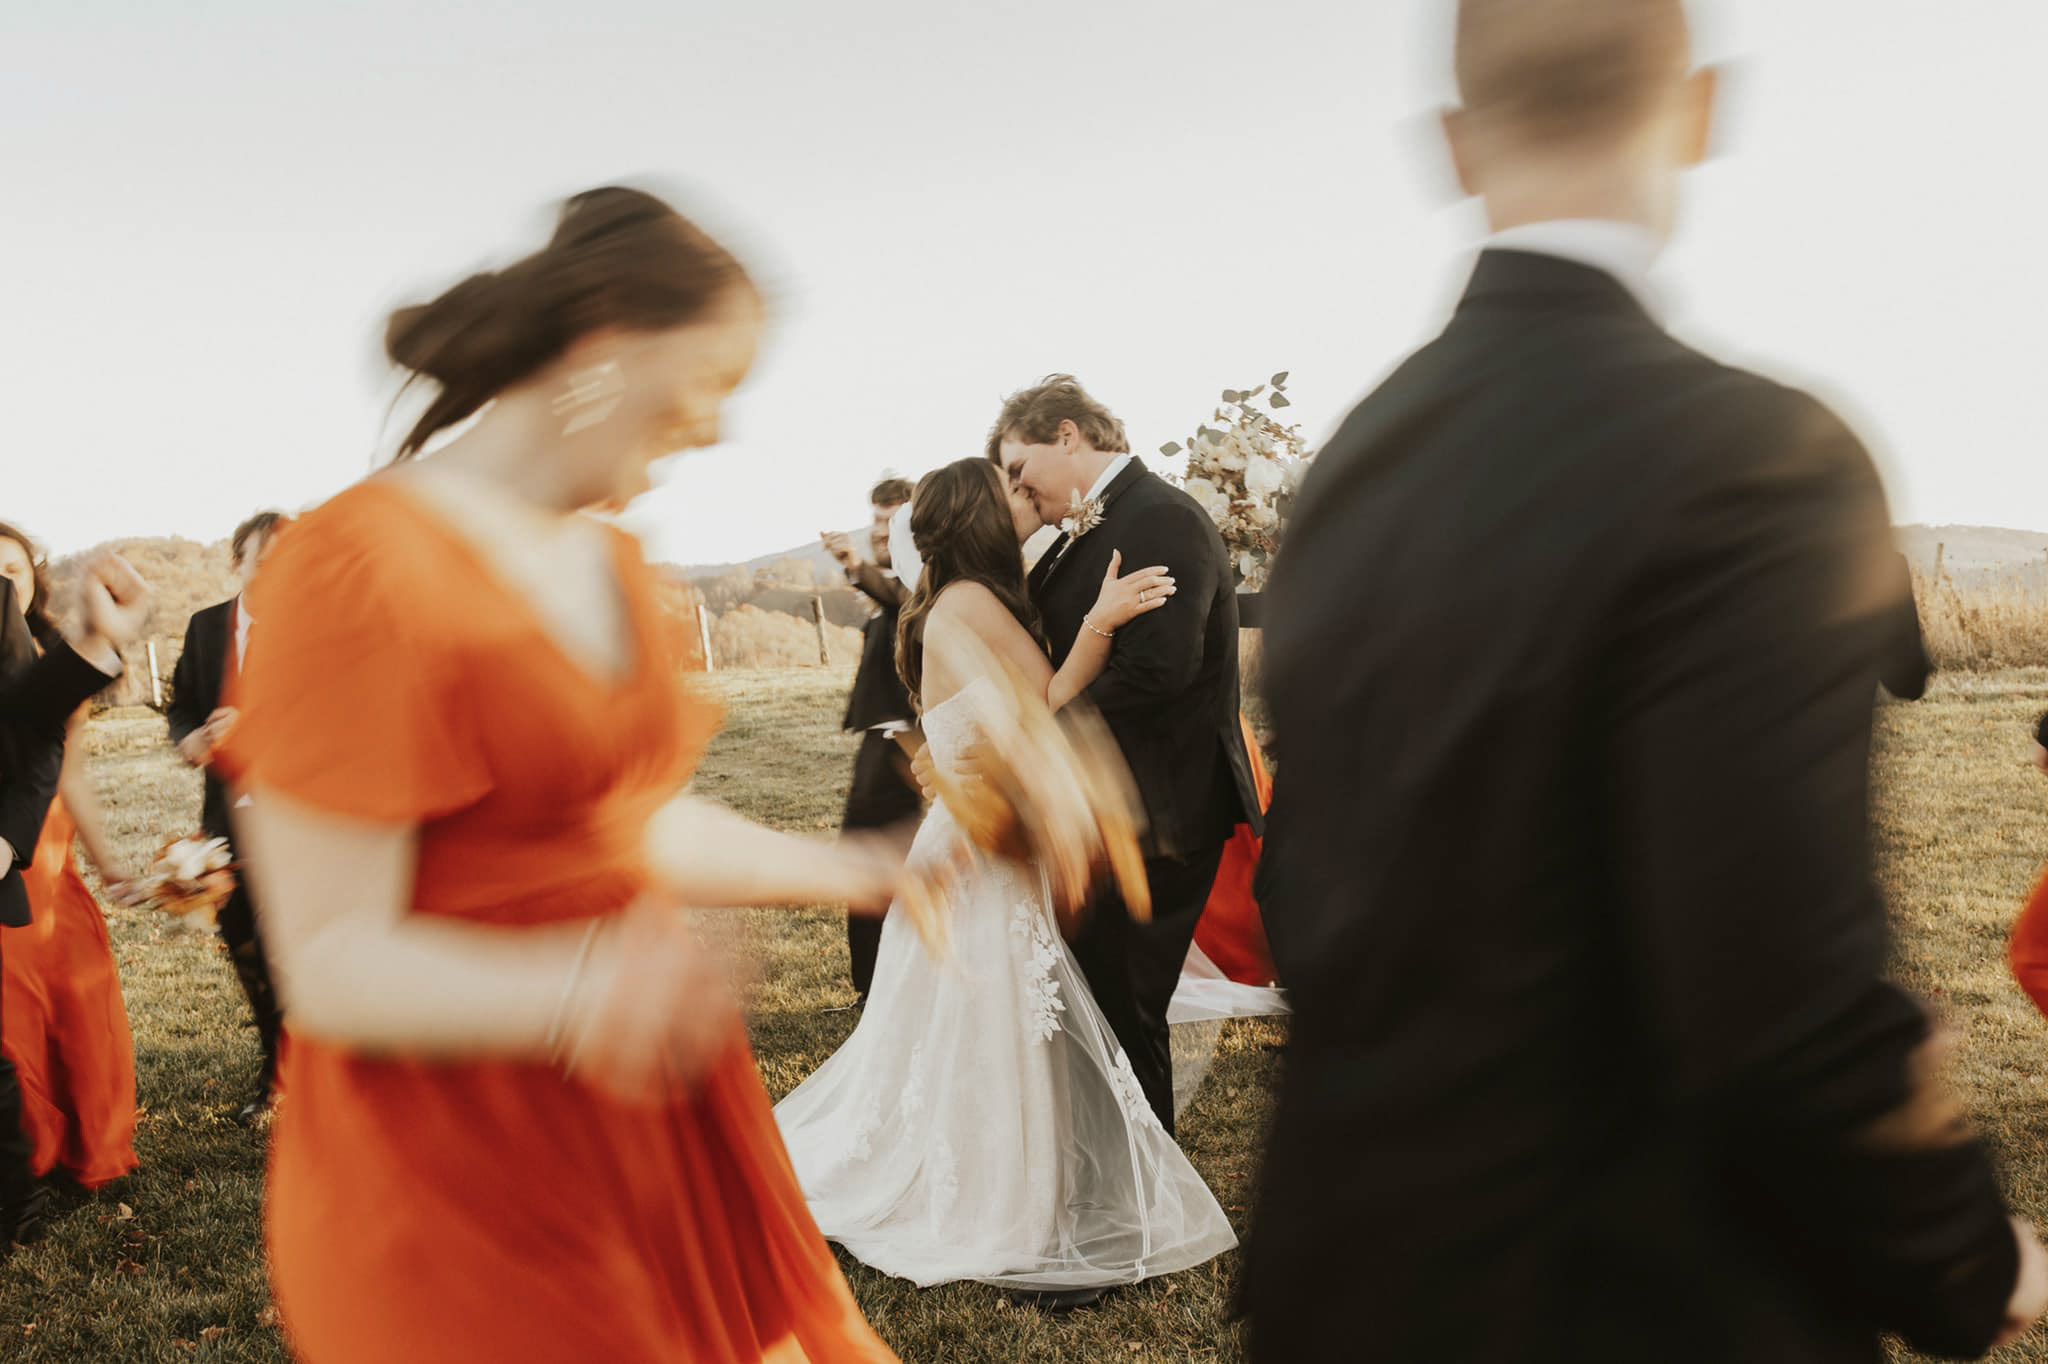 a wedding couple kissing in the middle while the bridesmaids and groomsmen are dancing around